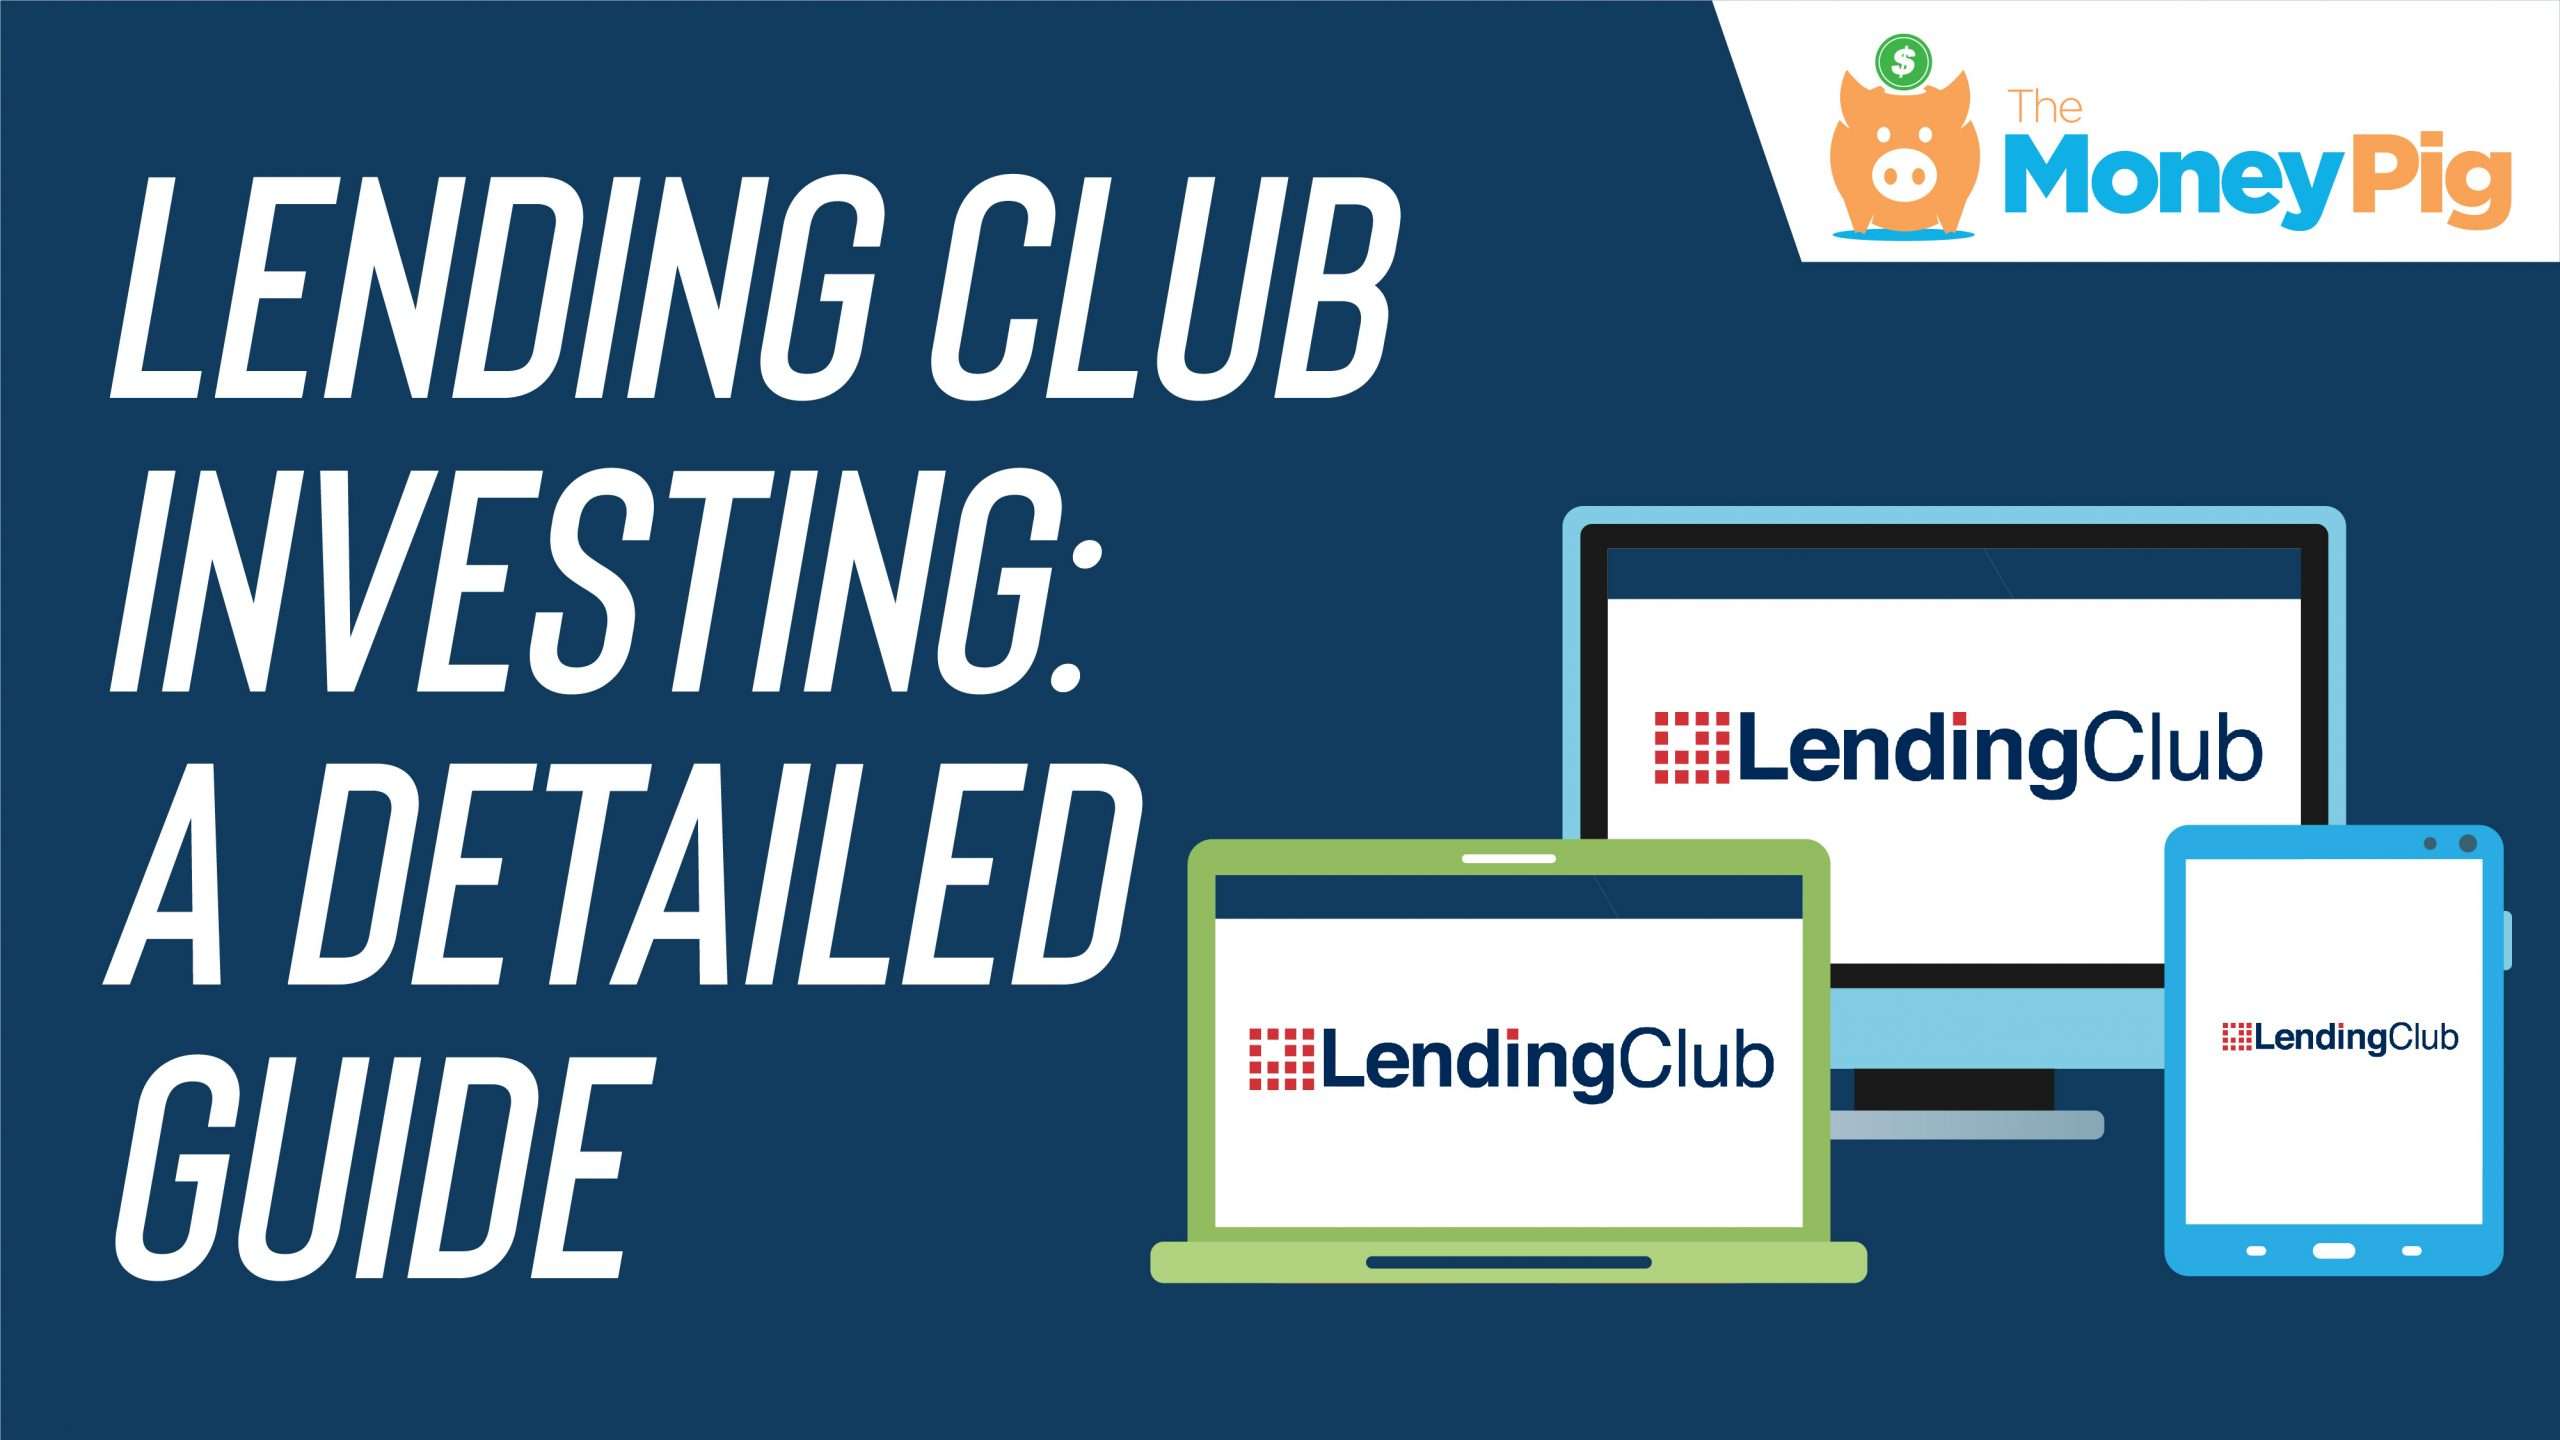 Lending Club Investing: A Detailed Guide